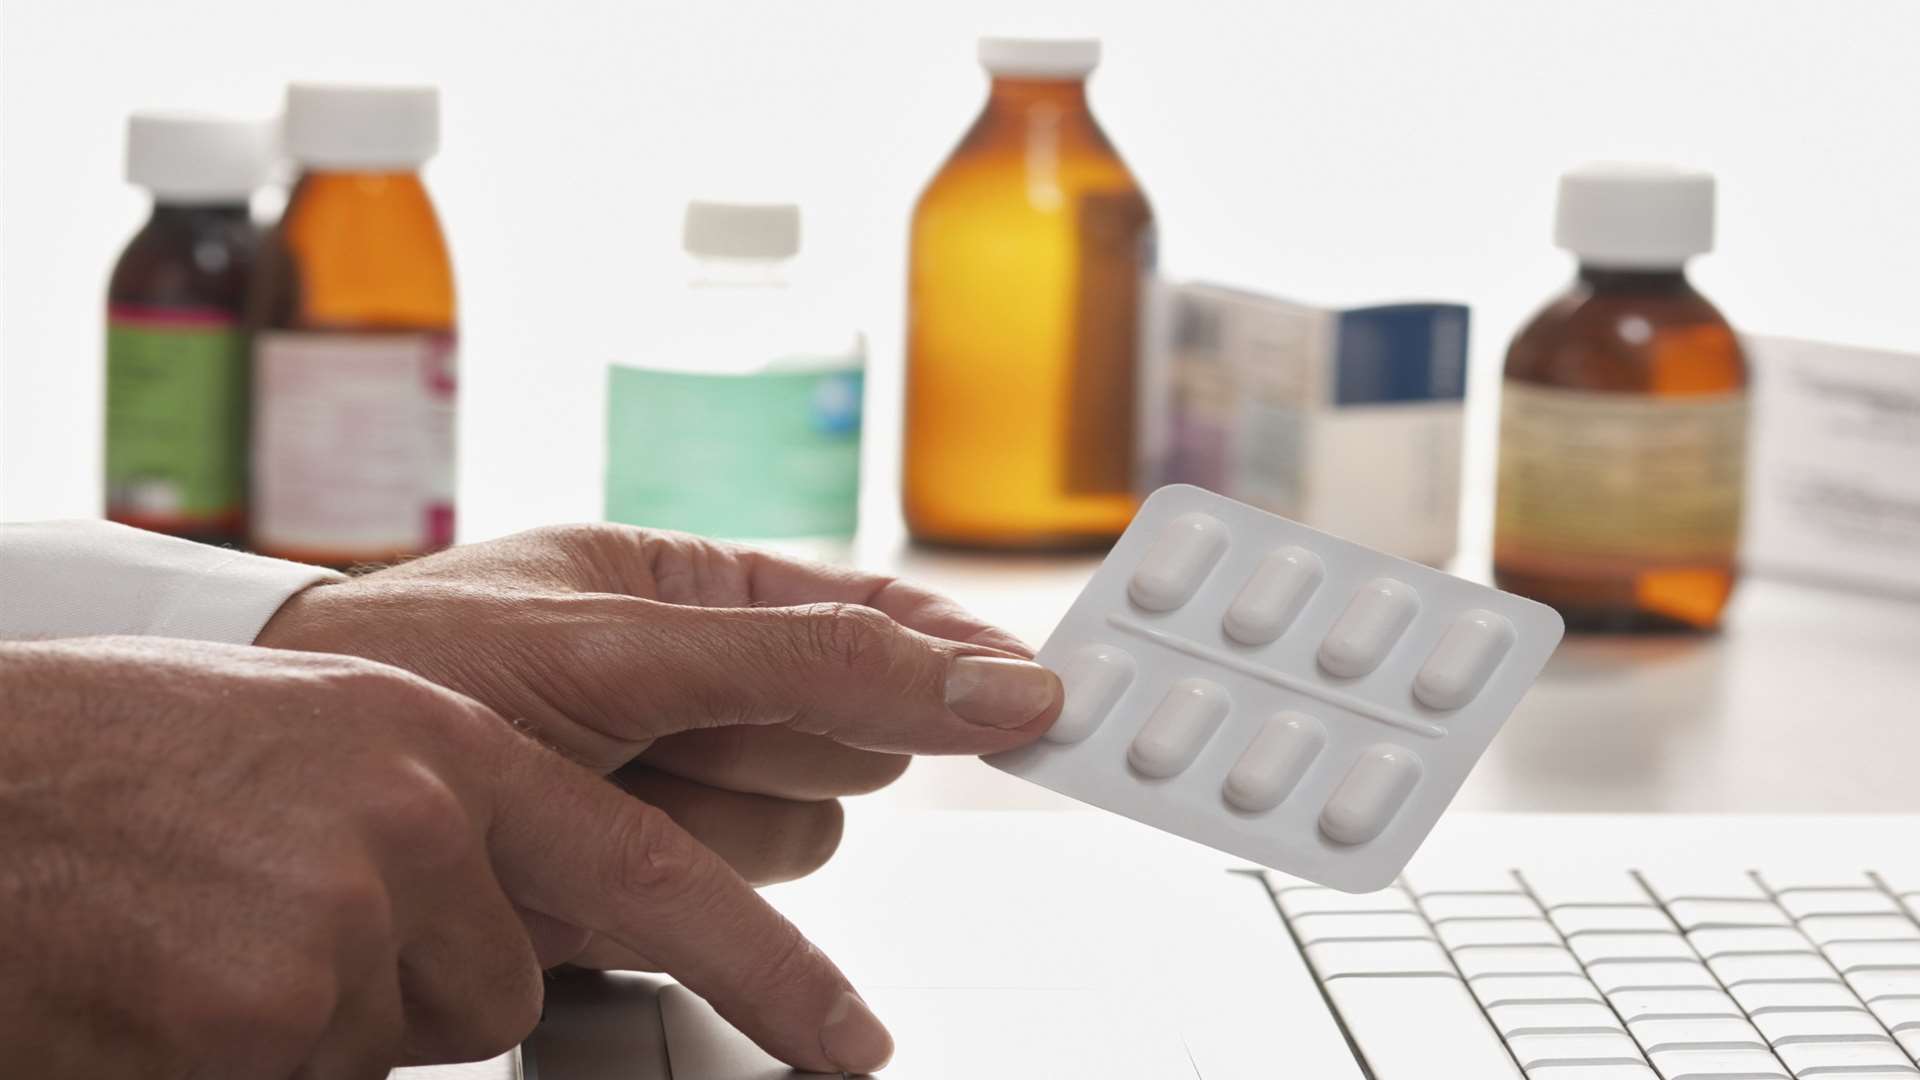 People are being warned of risks associated with overusing antibiotics